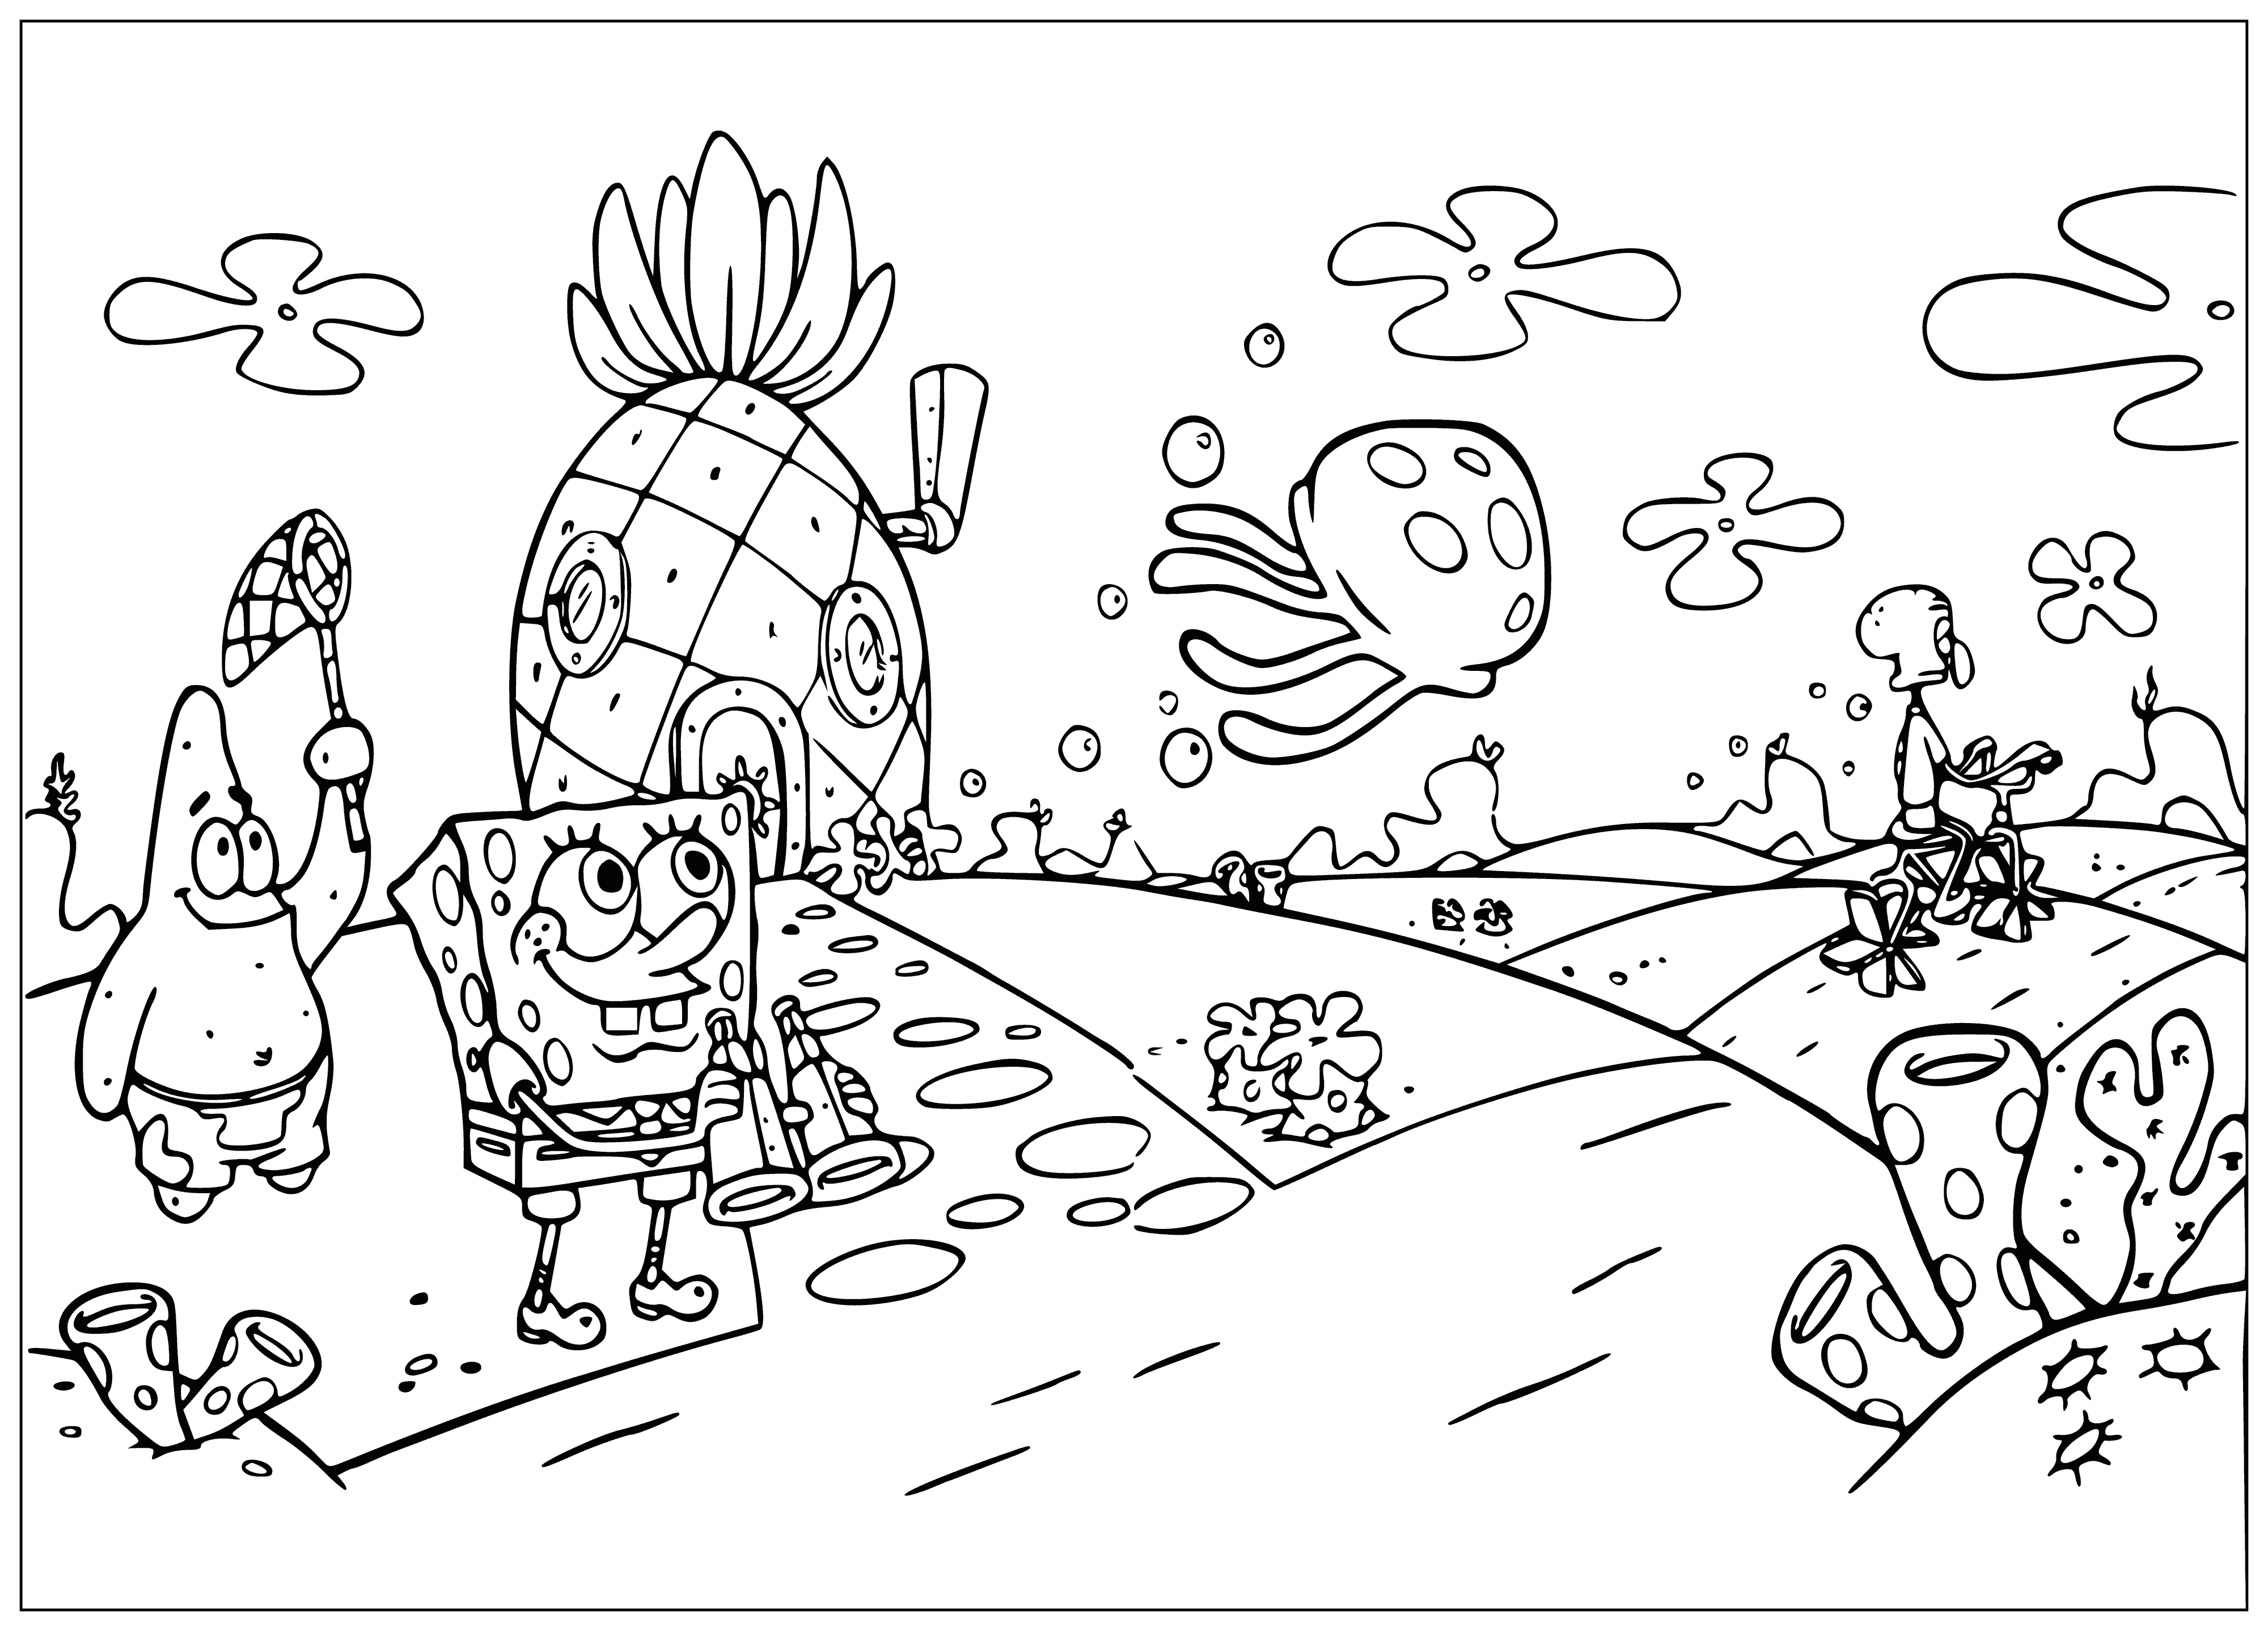 Wonderful day coloring page